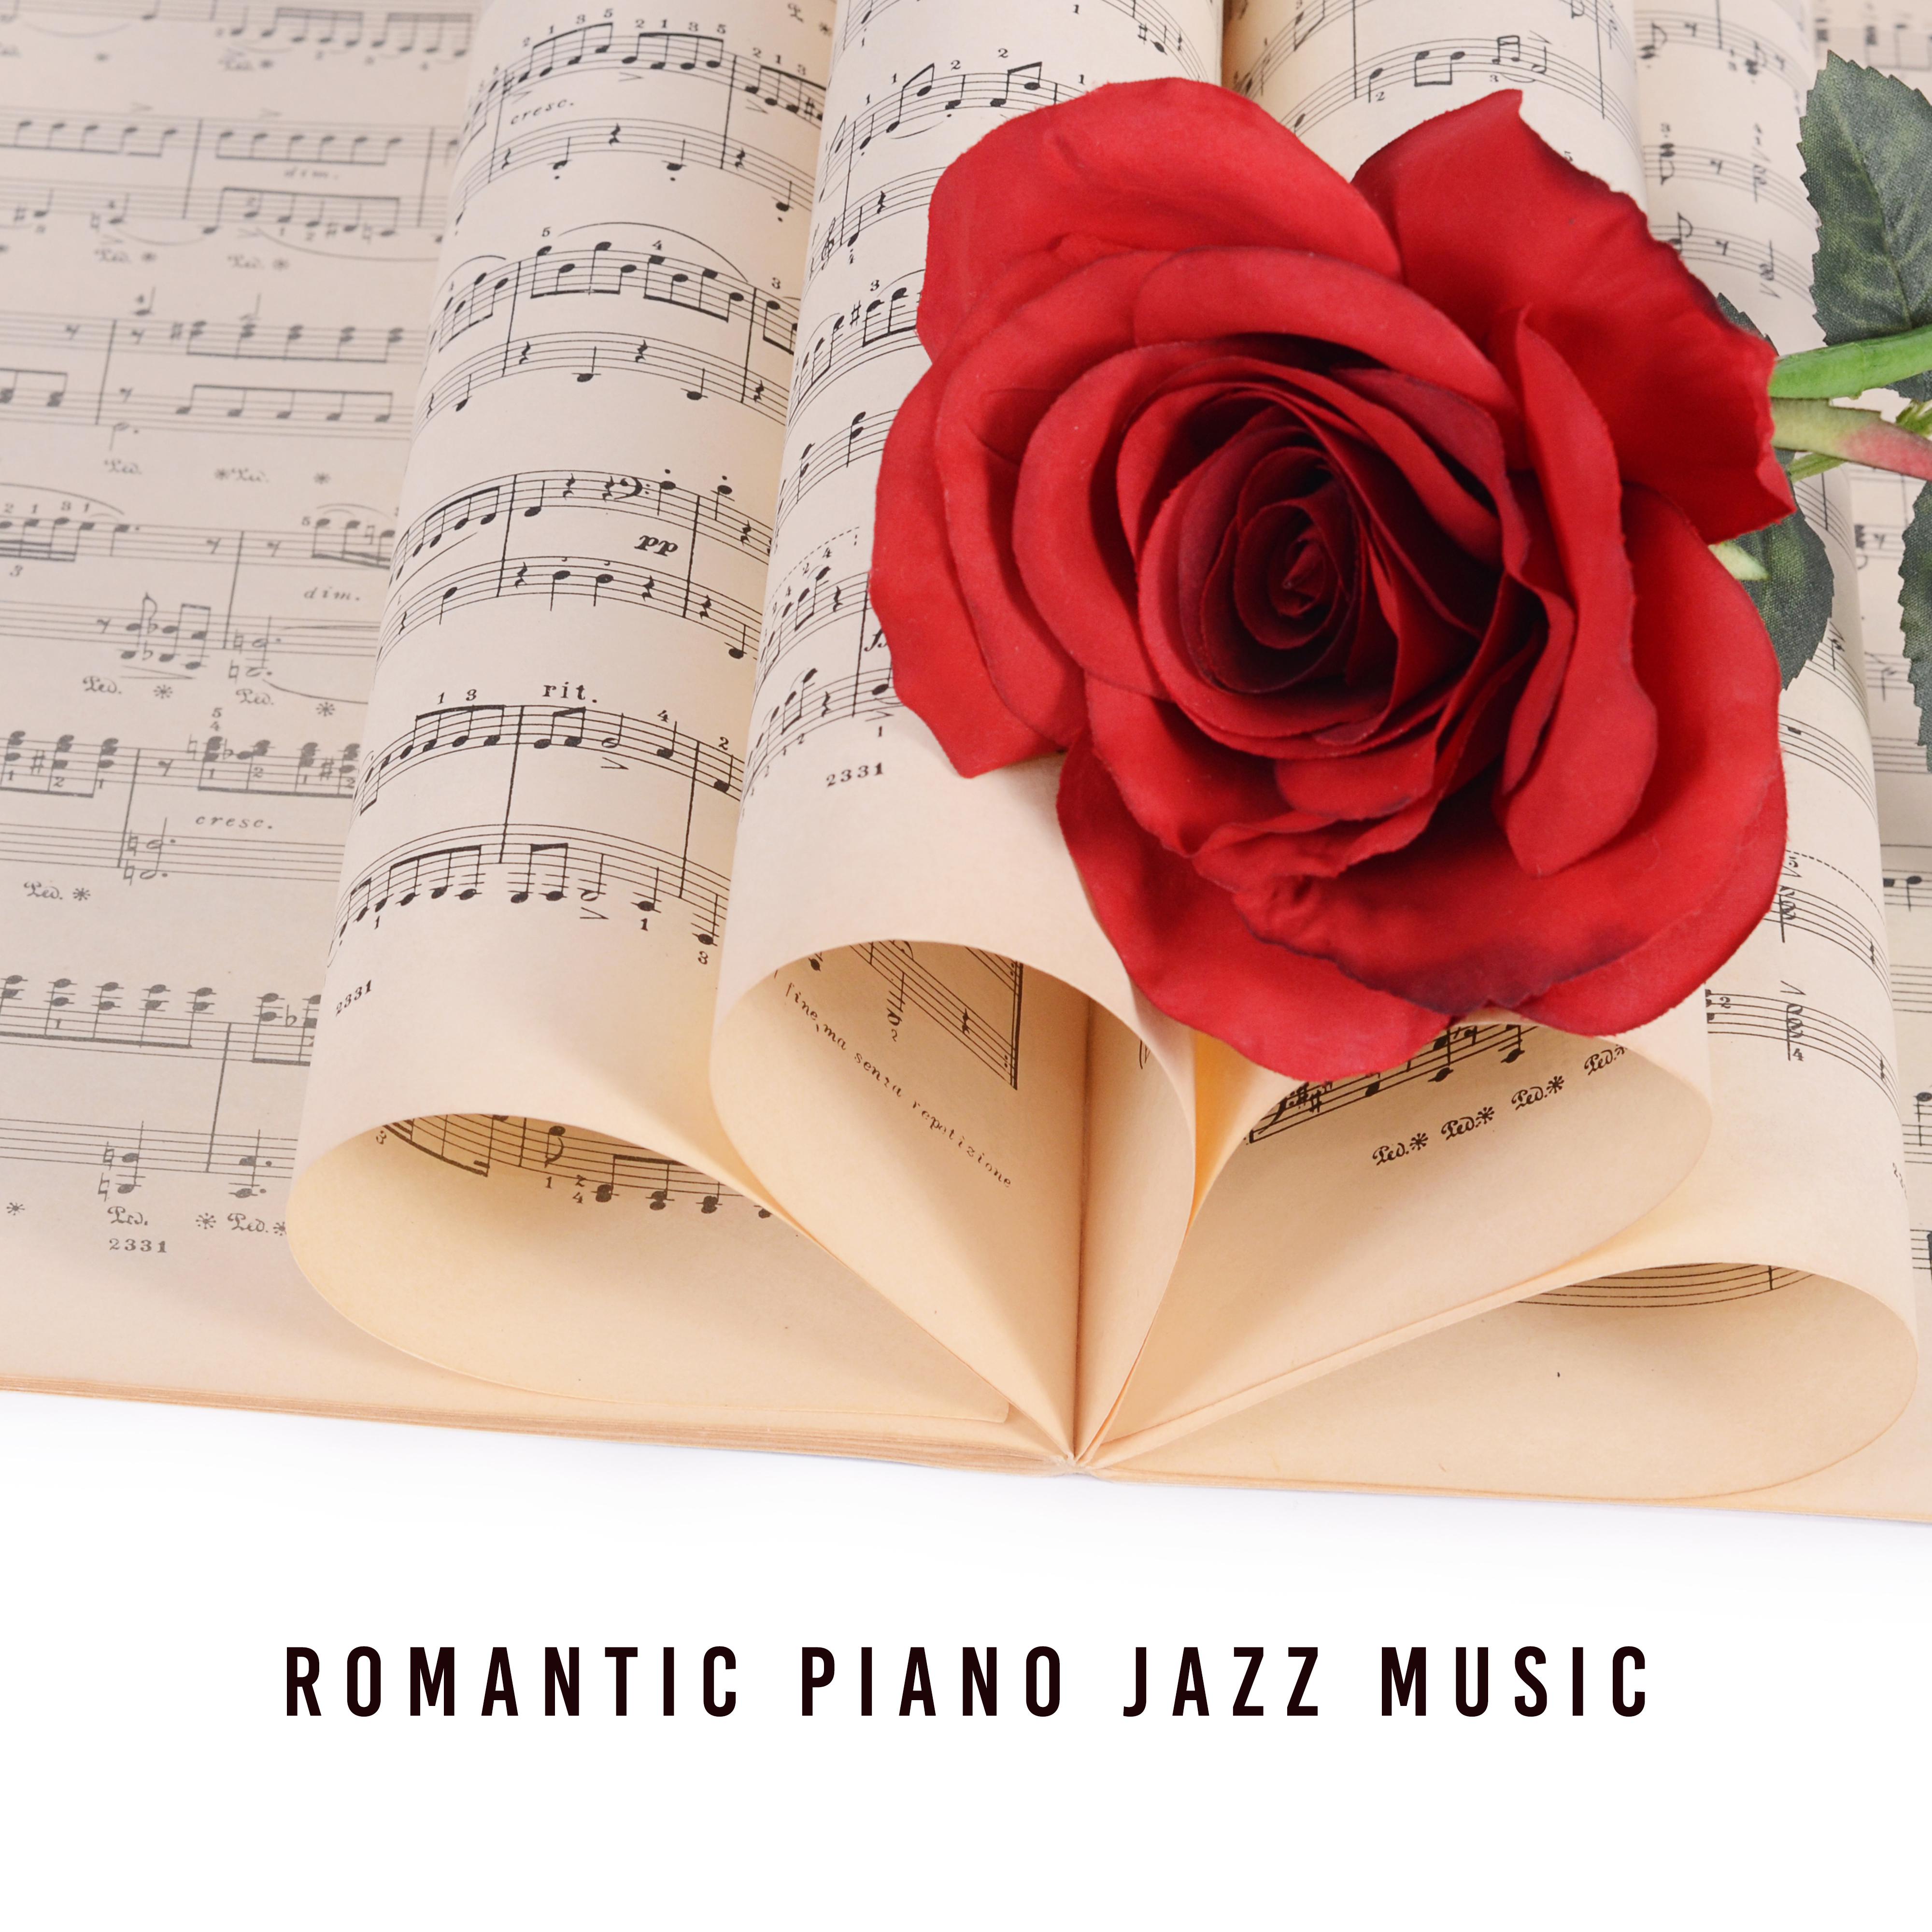 Romantic Piano Jazz Music – Smooth Jazz for Relaxation, Soothing Piano, Calm Jazz Collection, Jazz Relaxation, Instrumental Sounds for Lovers, Mellow Jazz 2019